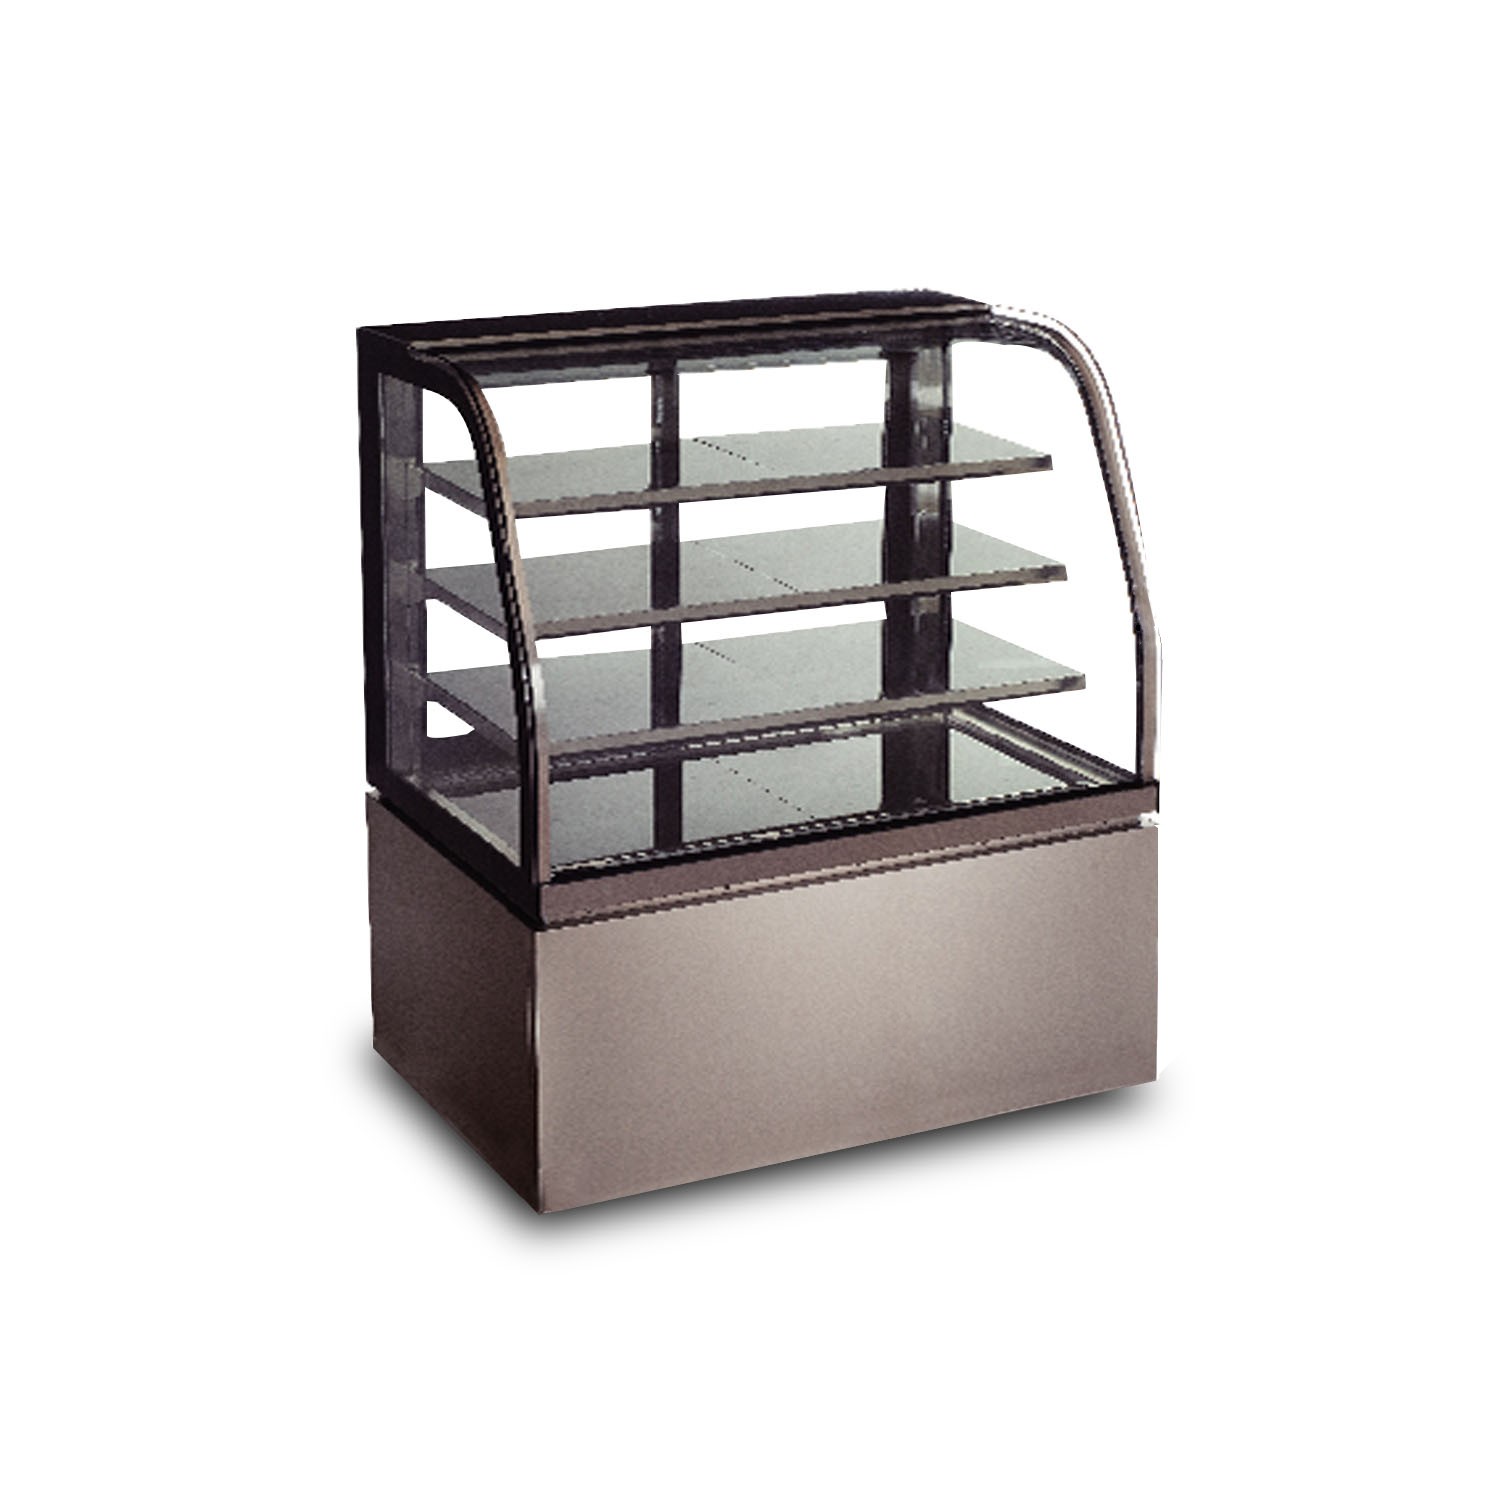 Refrigerated Display Case Main View